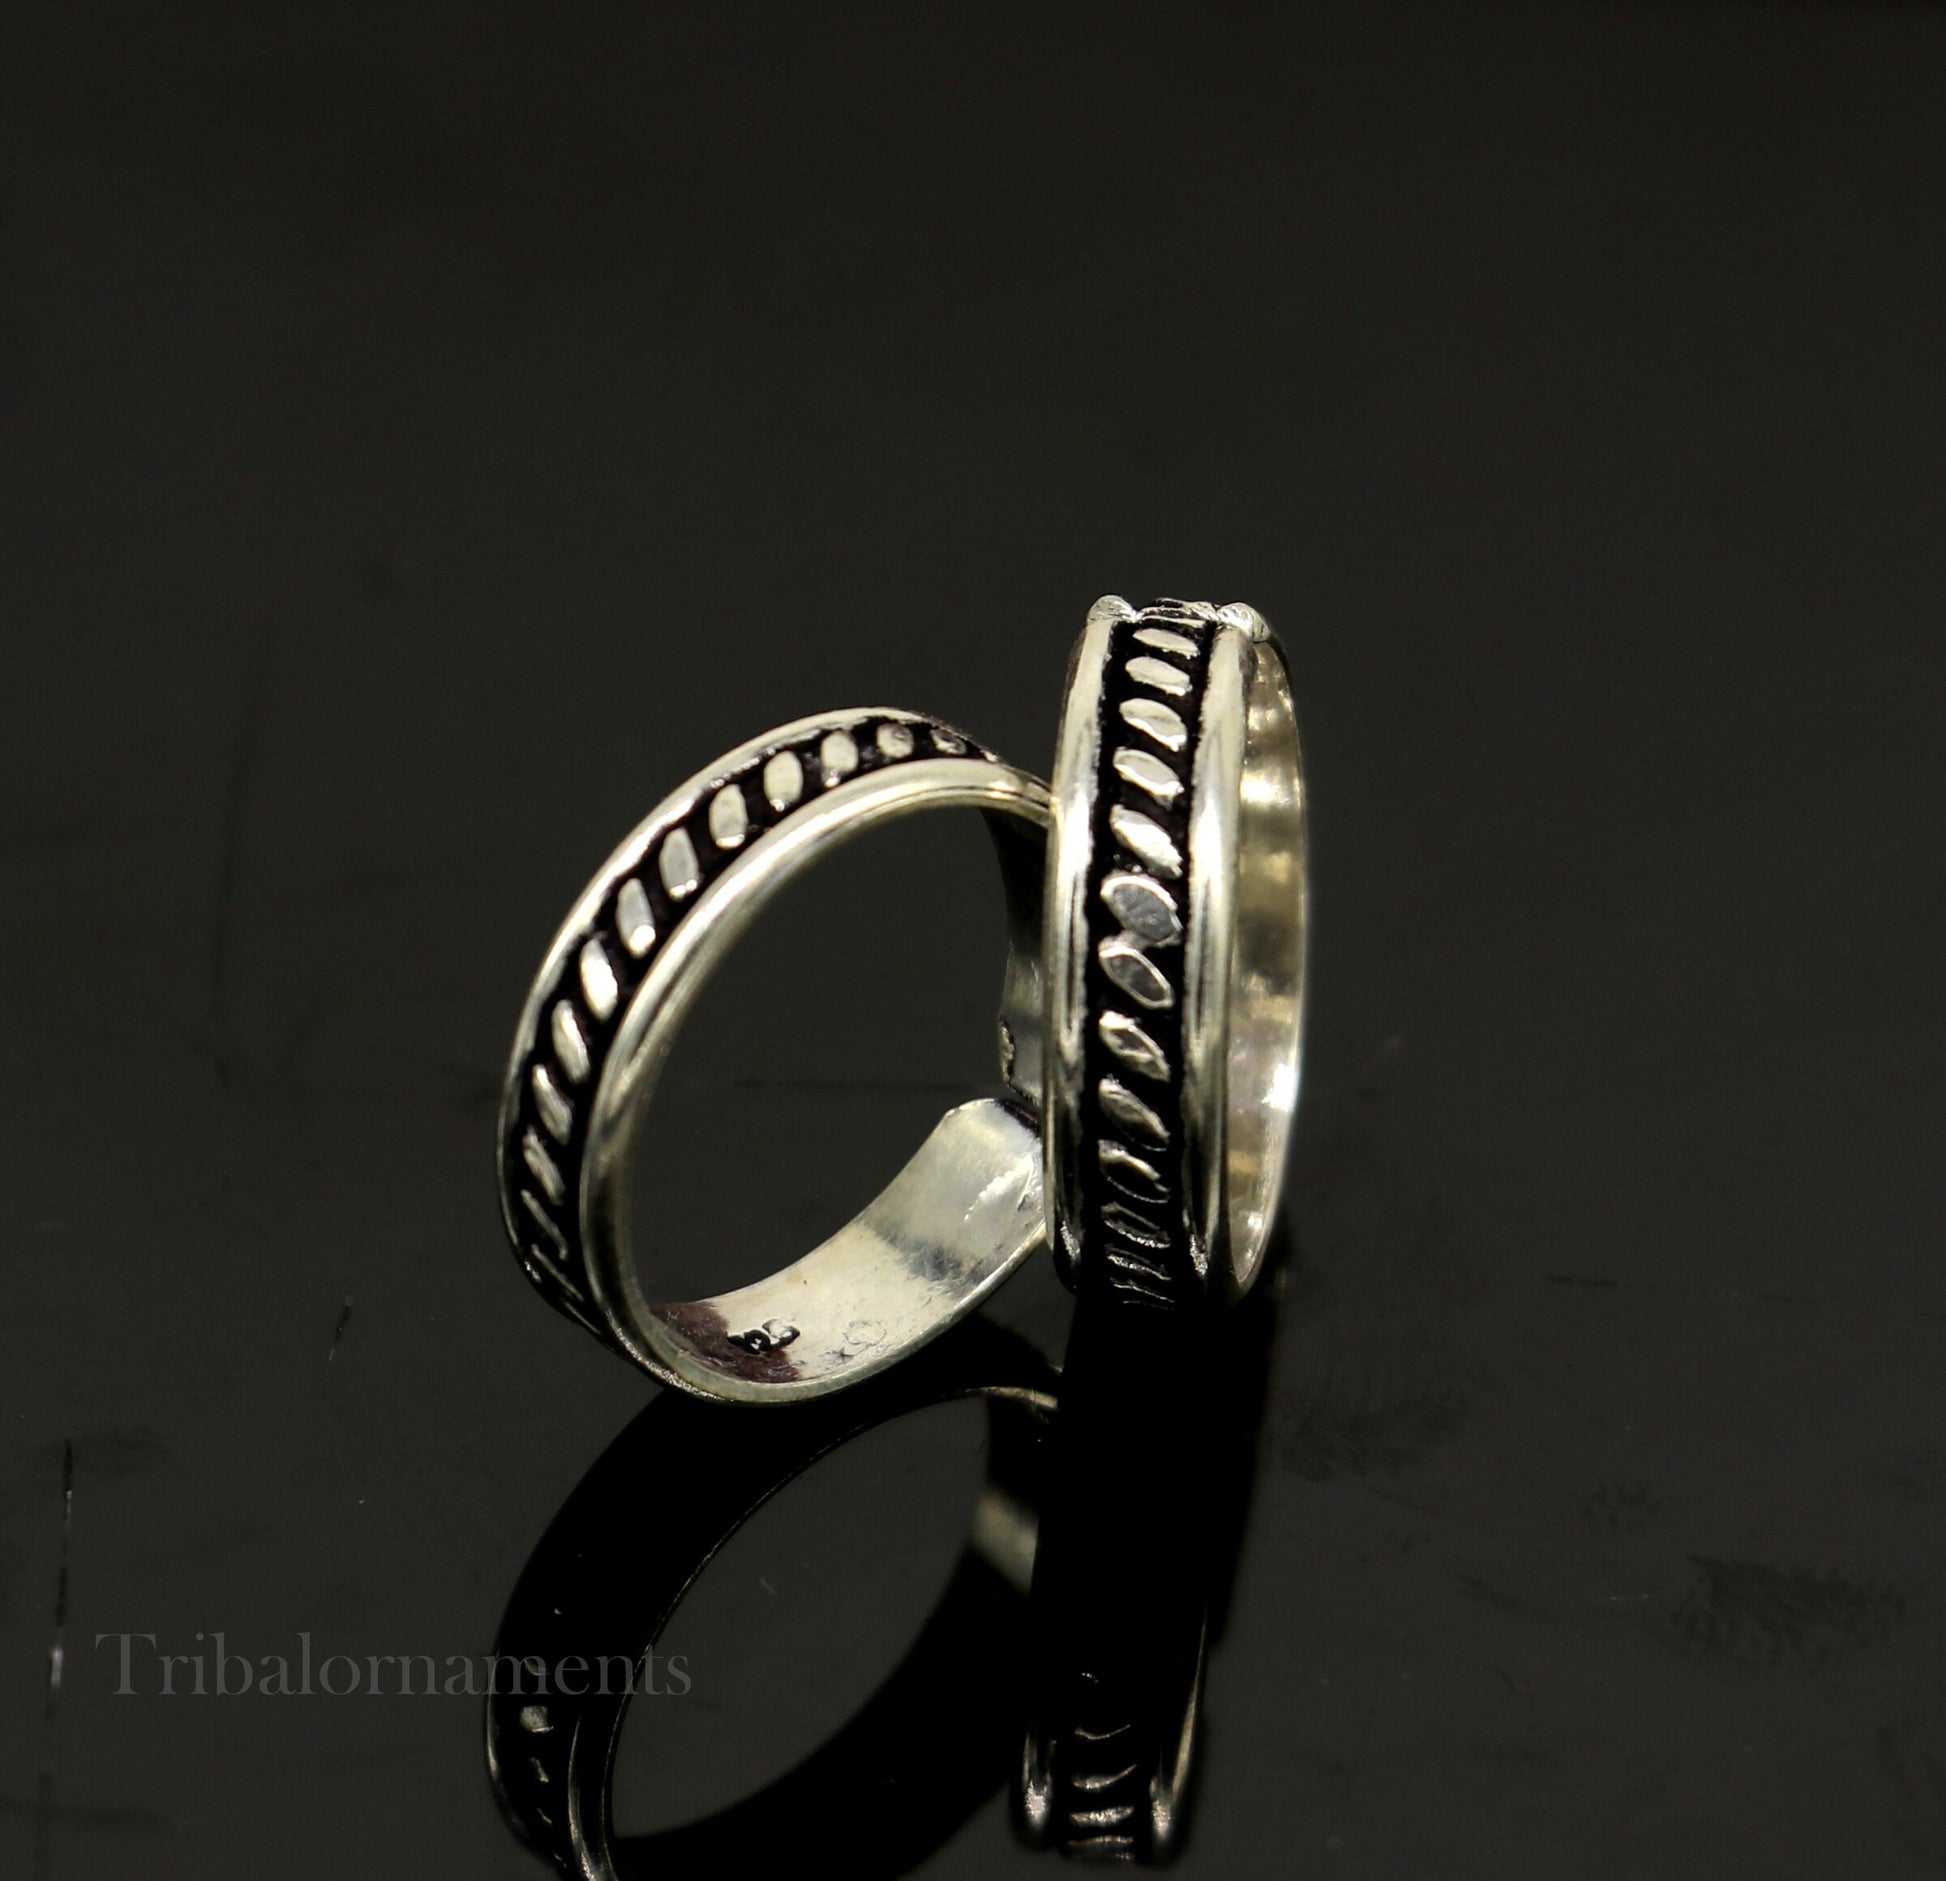 Adjustable 92.5 sterling silver excellent vintage design handmade toe ring, toe band modern women's brides jewelry from india toer111 - TRIBAL ORNAMENTS